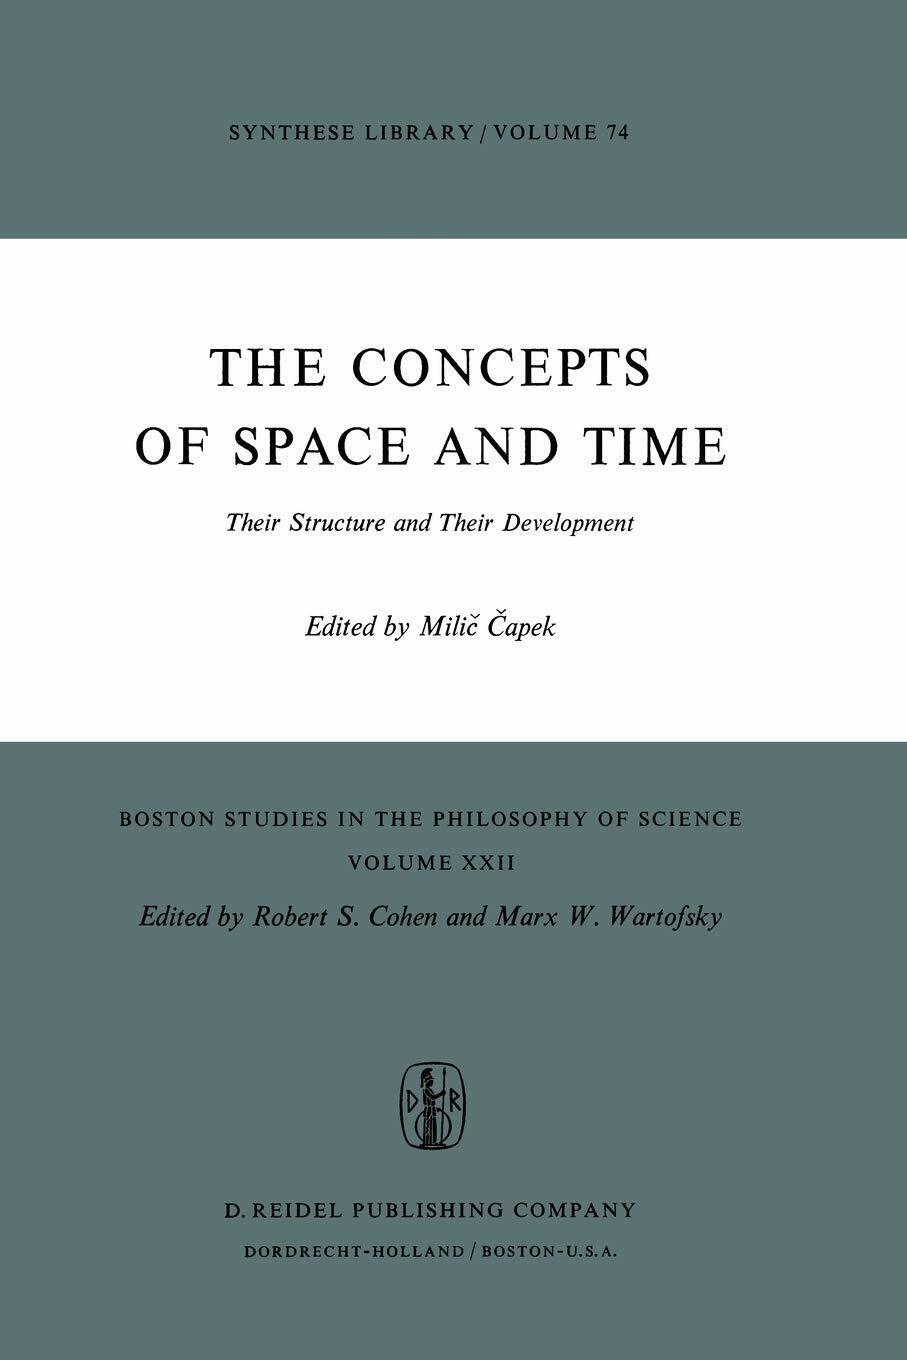 The Concepts of Space and Time - M. Capek - Springer, 1975